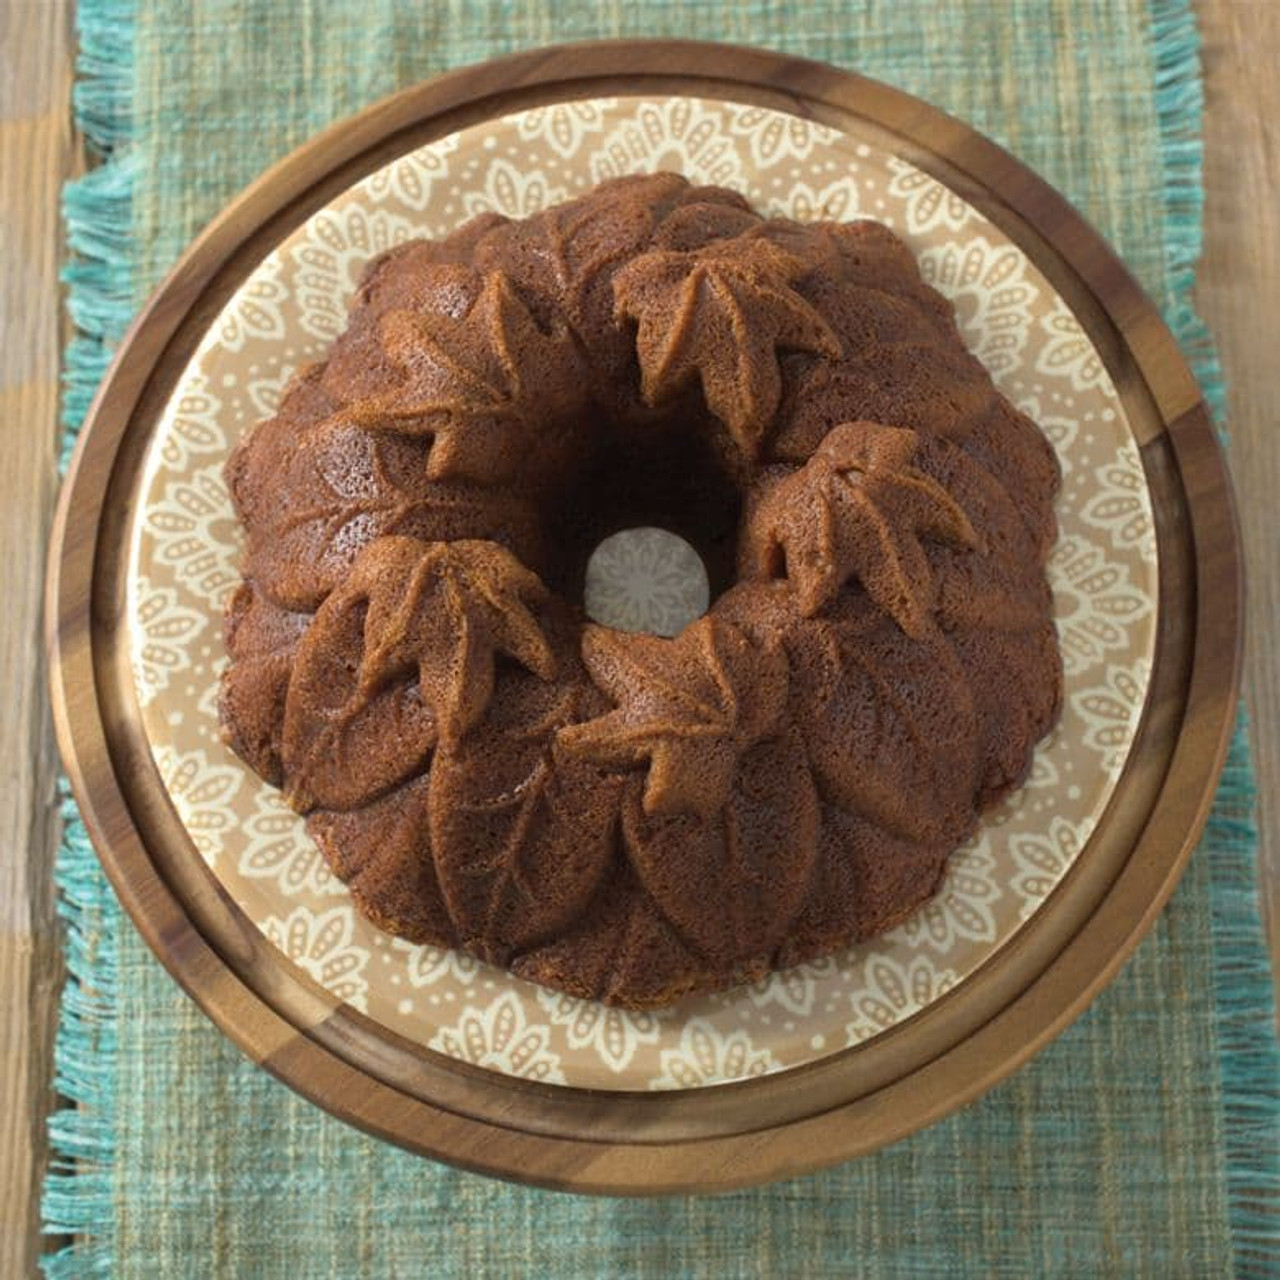 https://cdn11.bigcommerce.com/s-hccytny0od/images/stencil/1280x1280/products/732/3964/nordic-ware-harvest-leaves-bundt-pan-1__02580.1514677016.jpg?c=2?imbypass=on